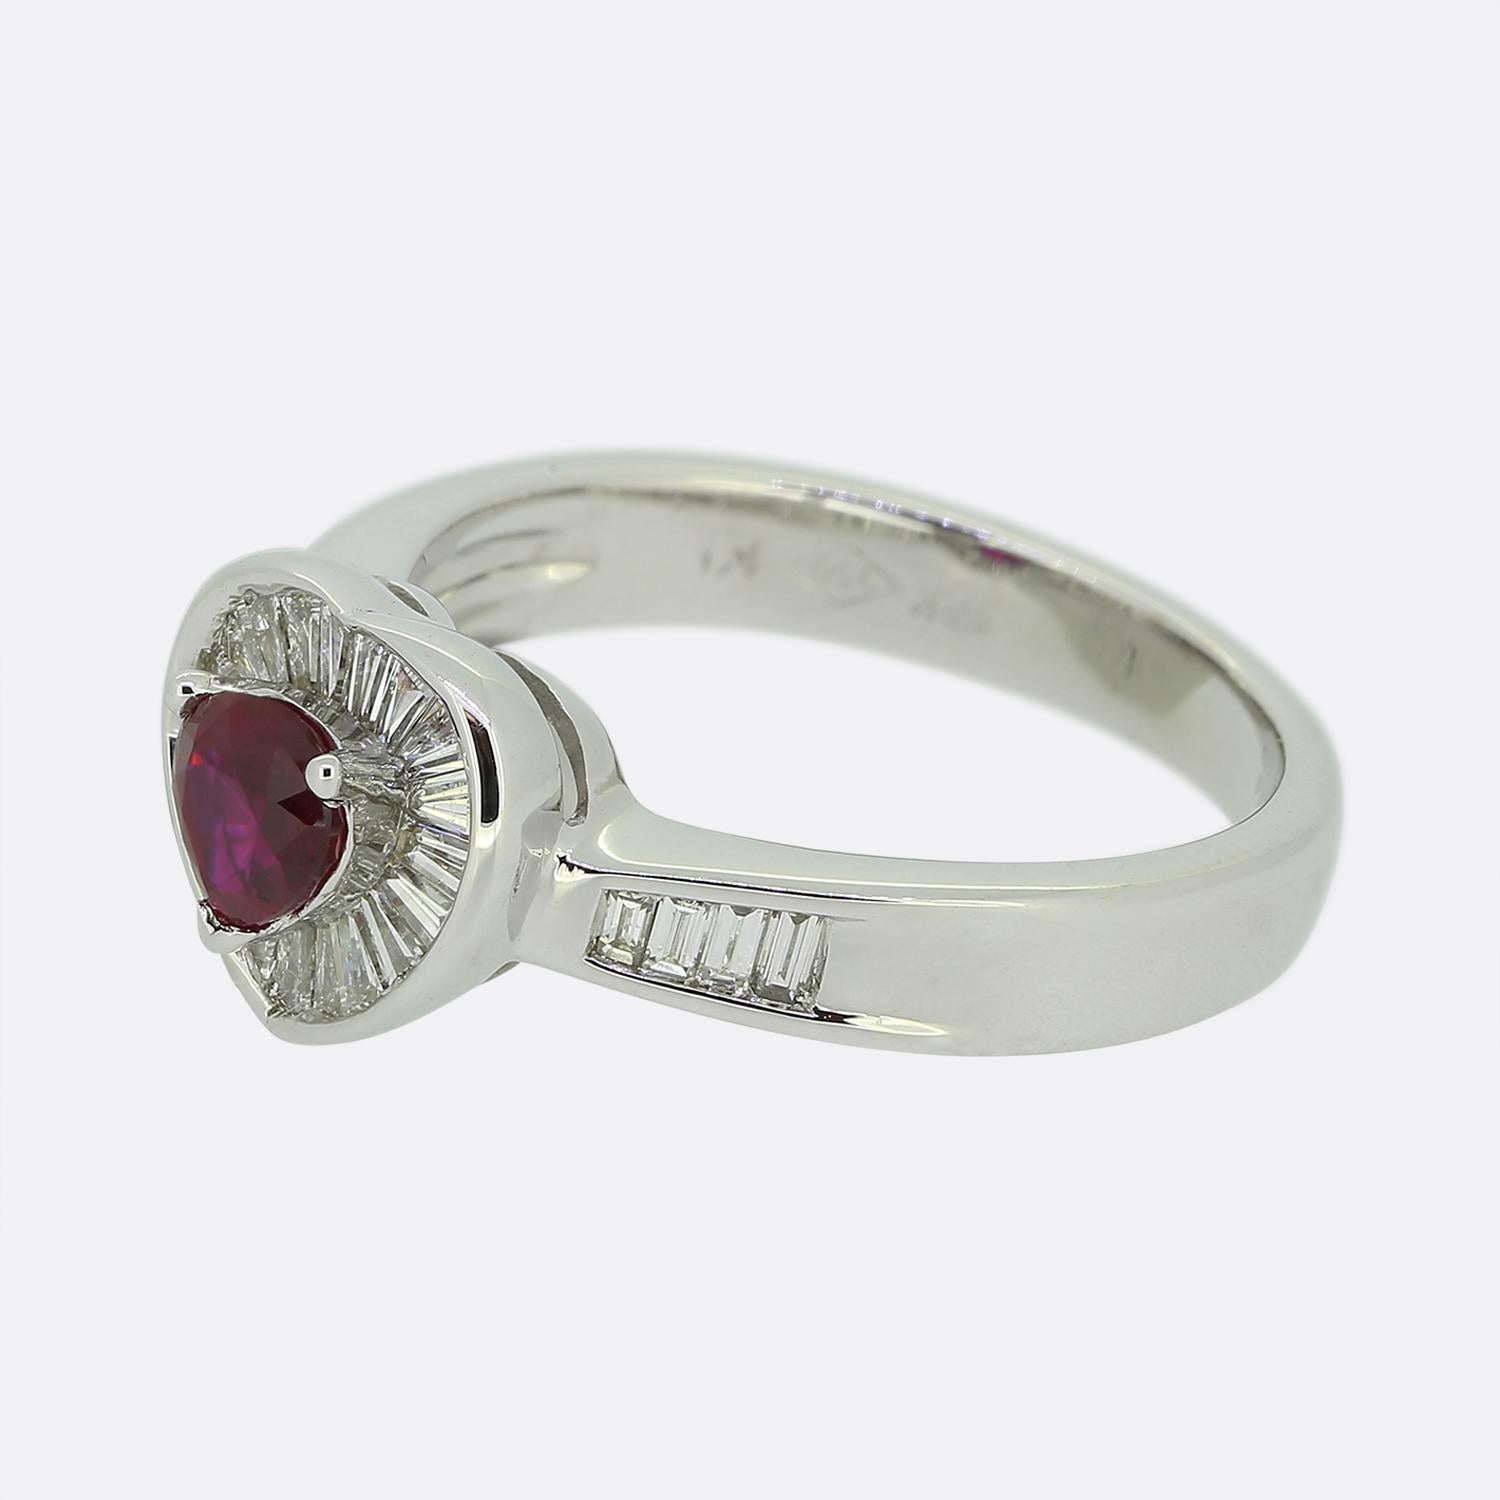 Here we have a delightful 18ct white gold ruby and diamond ring. The centralised ruby is a heart shape, sits slightly risen and possesses a highly desirable intense red hue. Surrounding this principal stone are multiple bright white tapered baguette